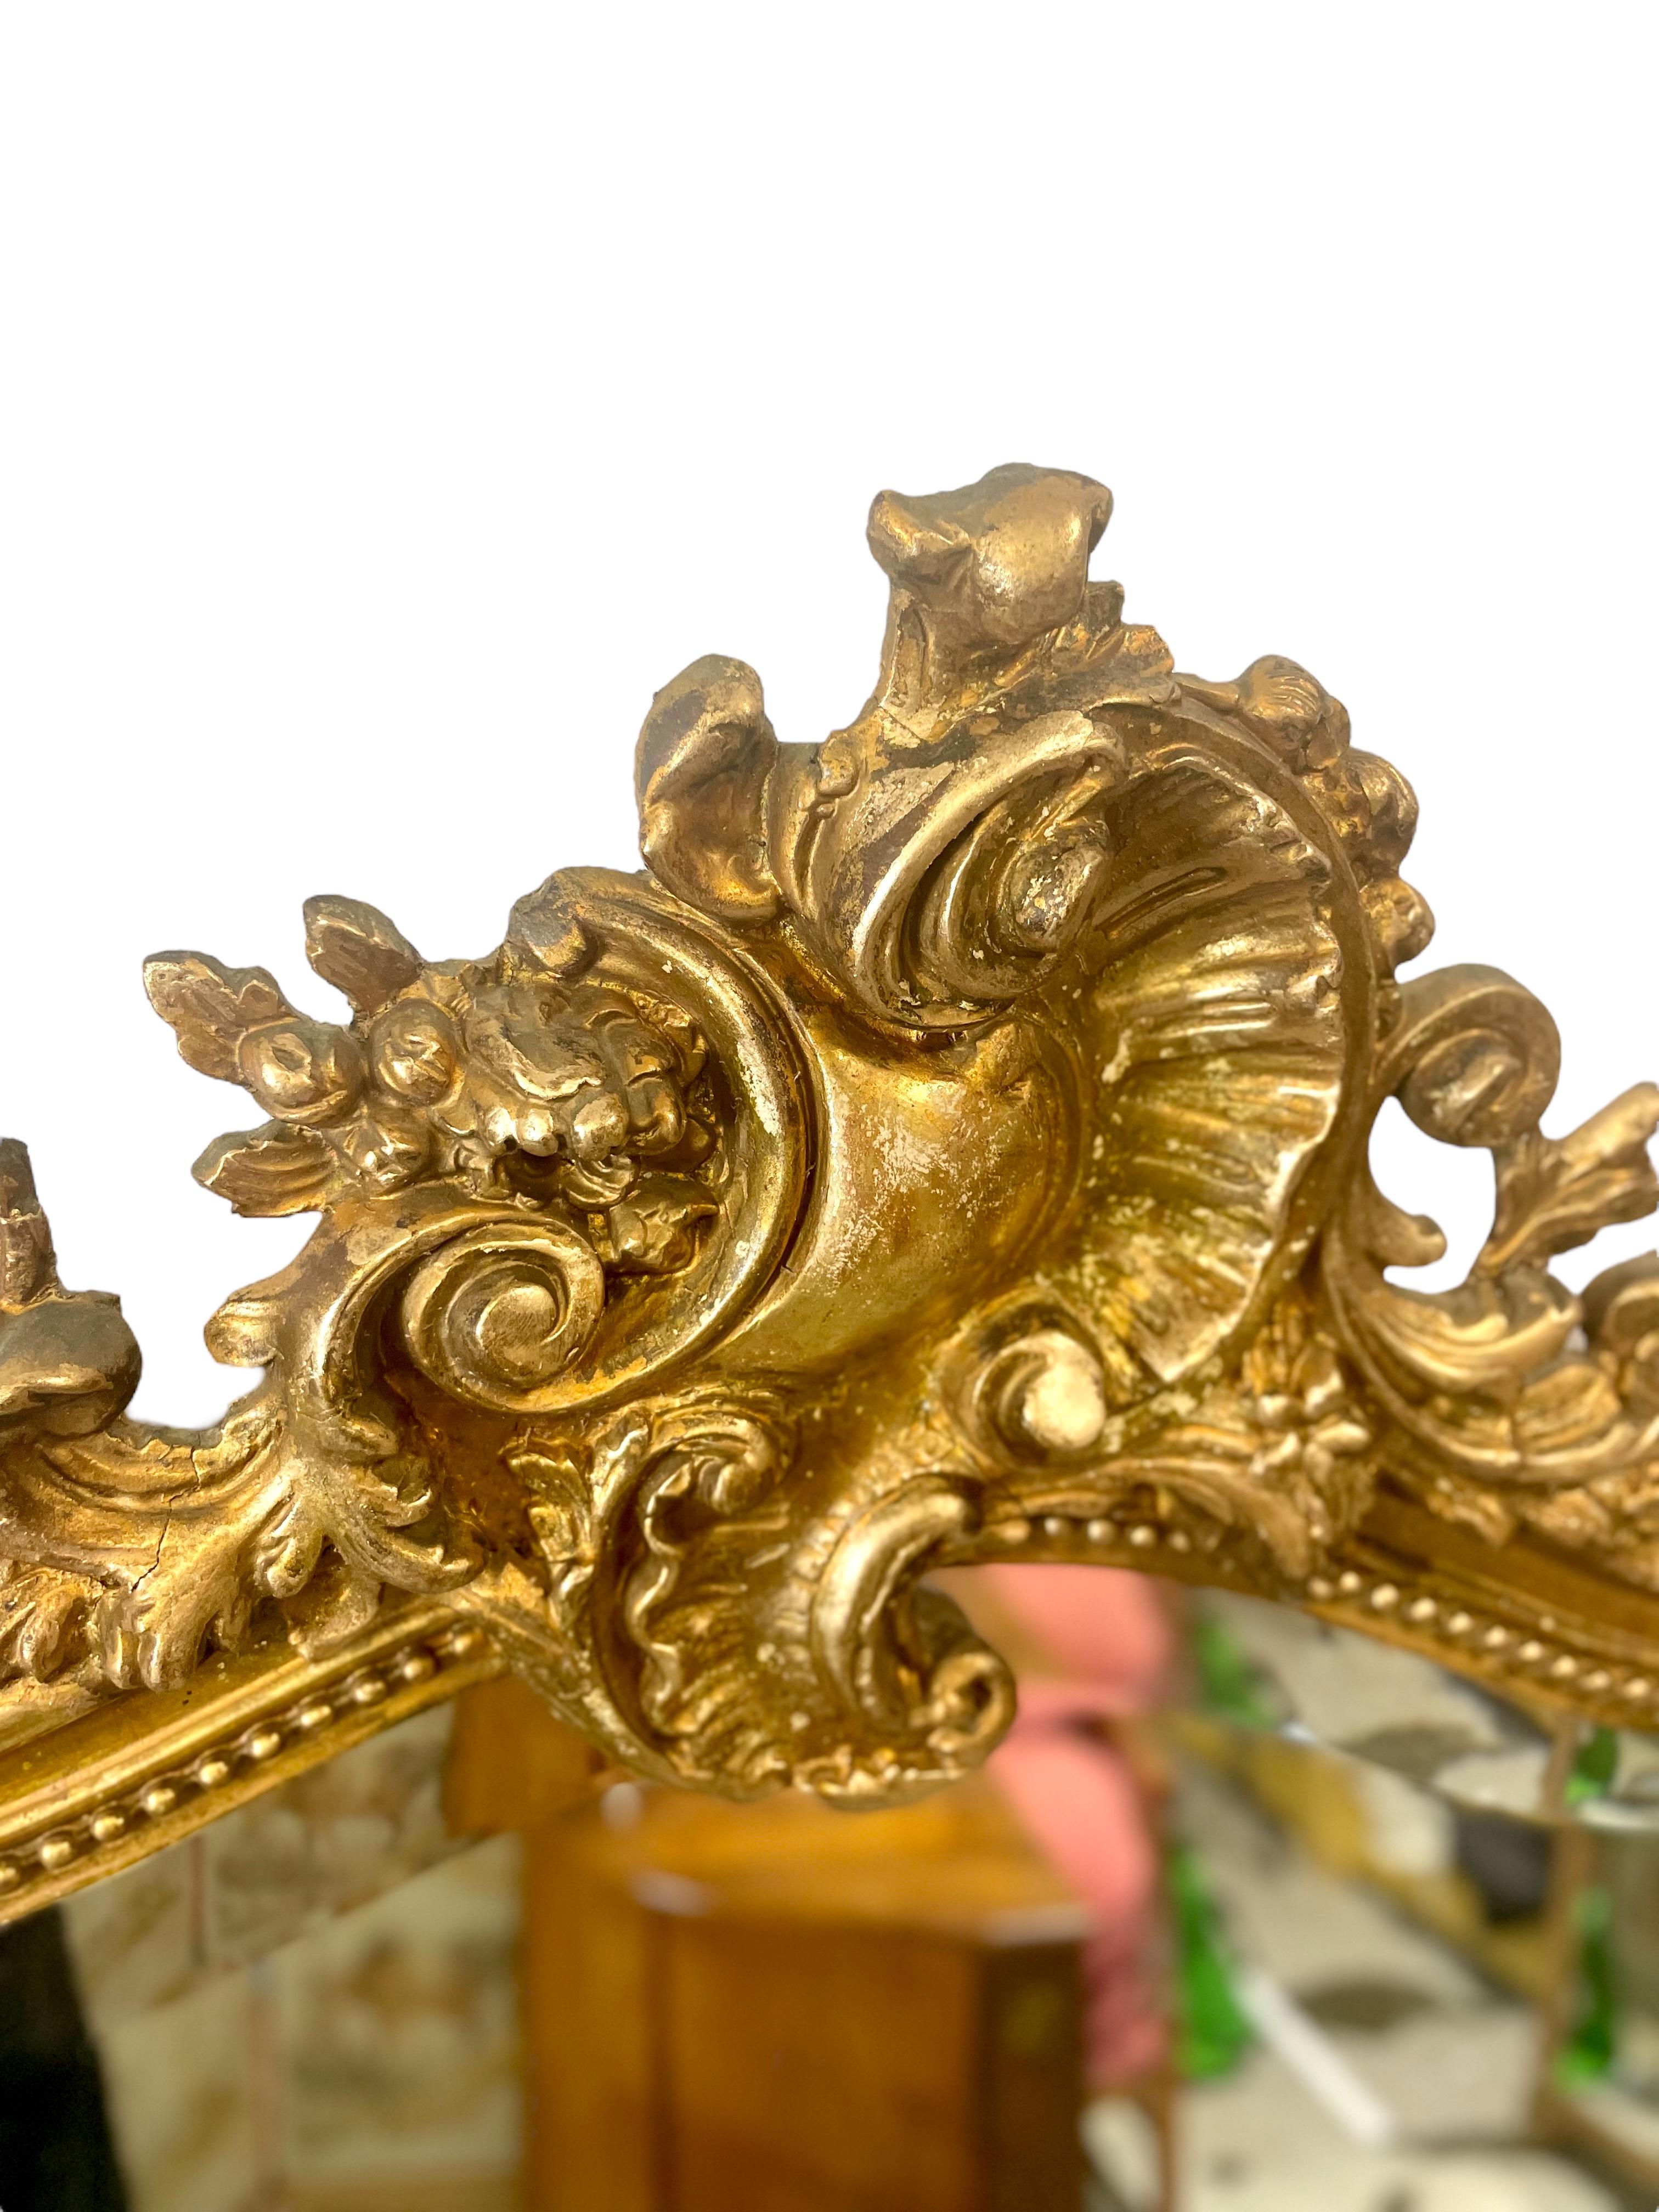 A stunning 19th century Louis XV style overmantel mirror in wood and gilded stucco. An elaborately carved and out-sized asymmetric crest in a foliate scroll and stylised Rocaille motifs adorns the peak. The inner frame is decorated with a 'string of